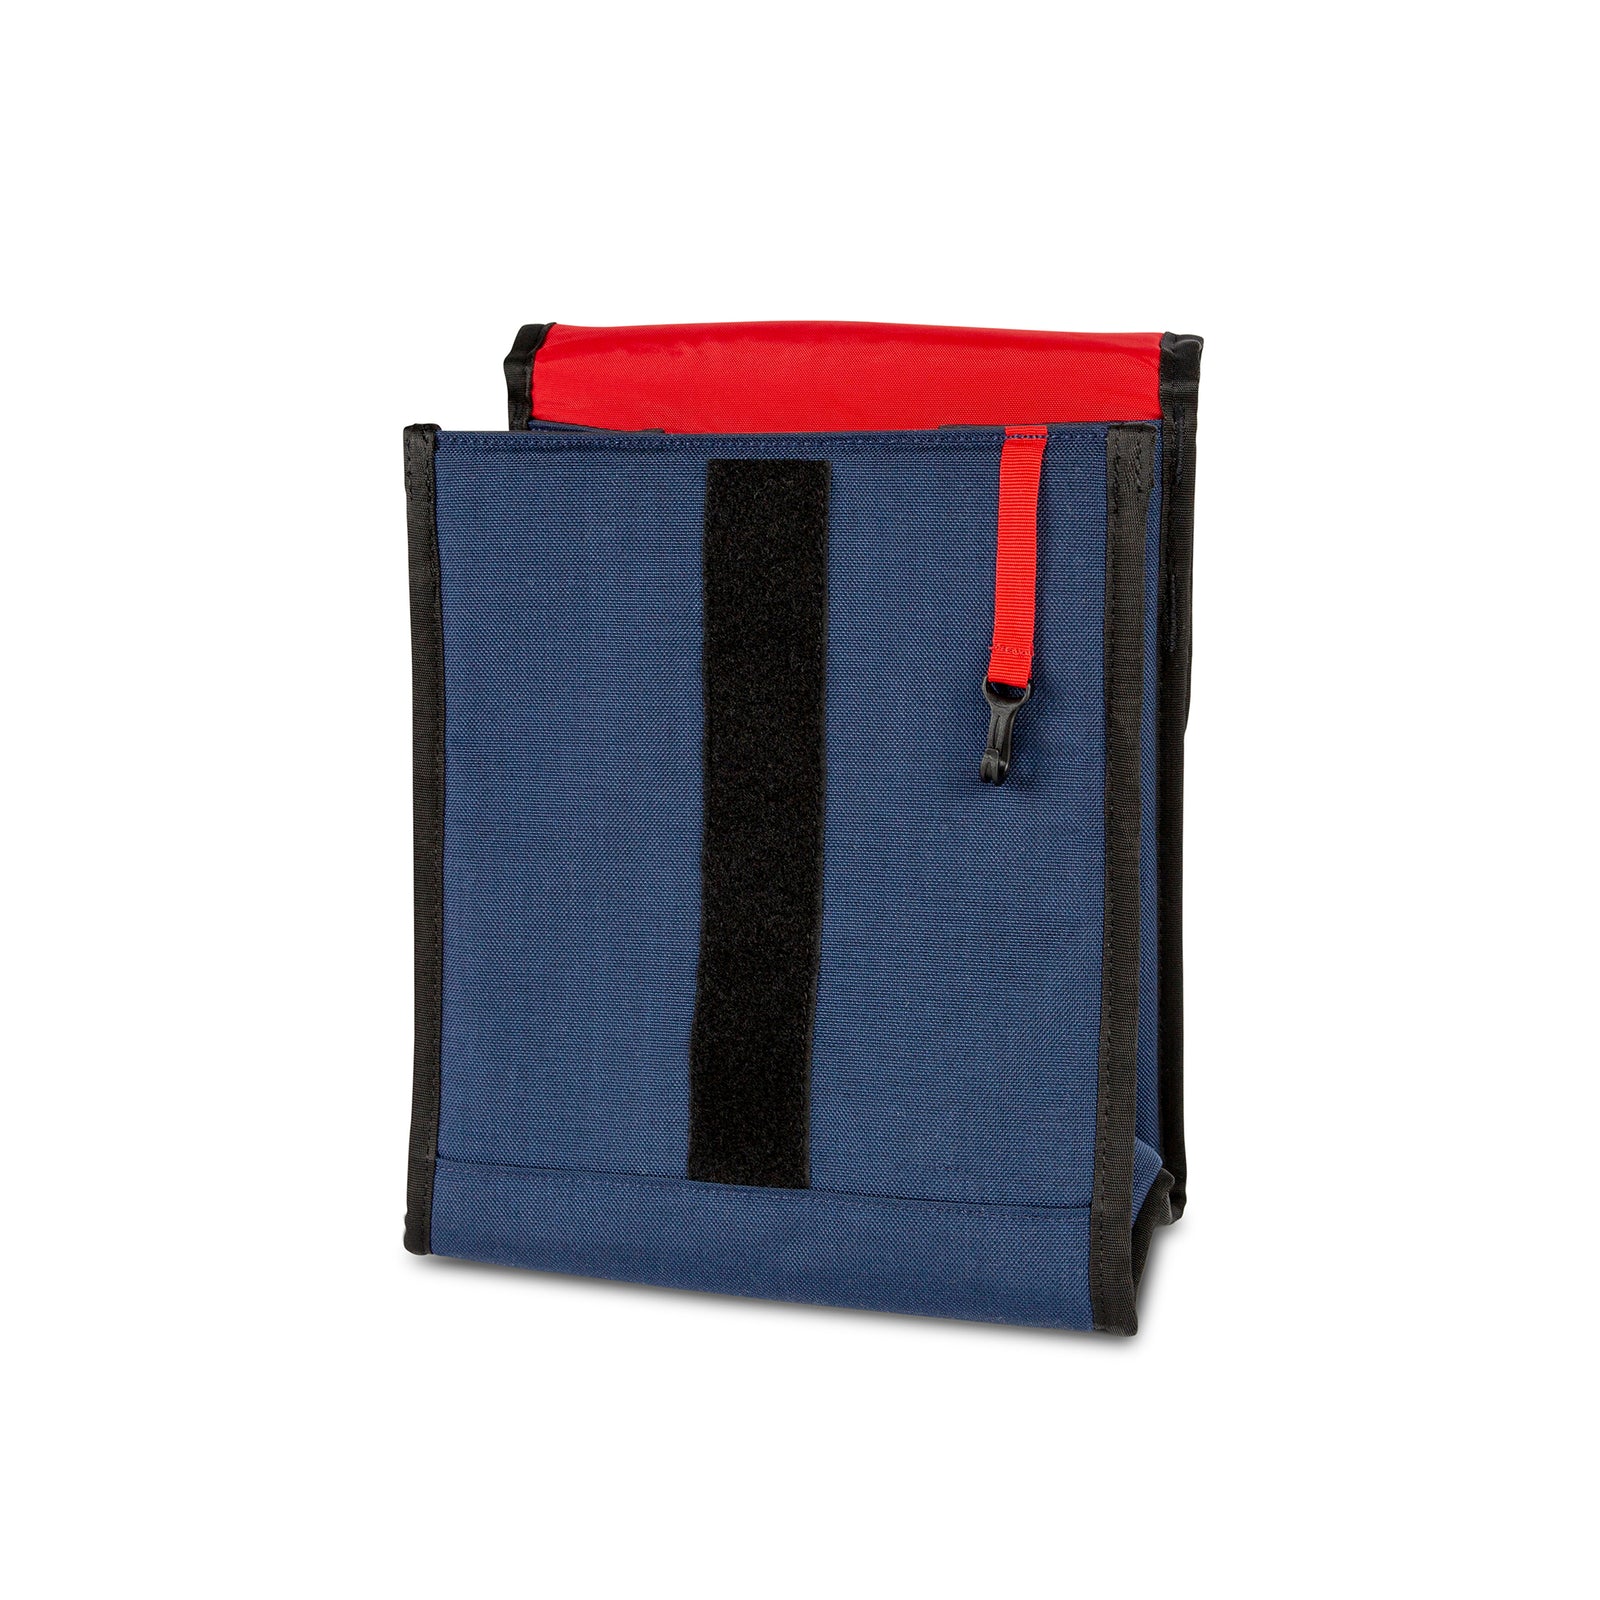 Topo Designs x New Belgium Fat Tire 6-pack beer Cooler Bag in Navy blue / red showing key clip under front flap.